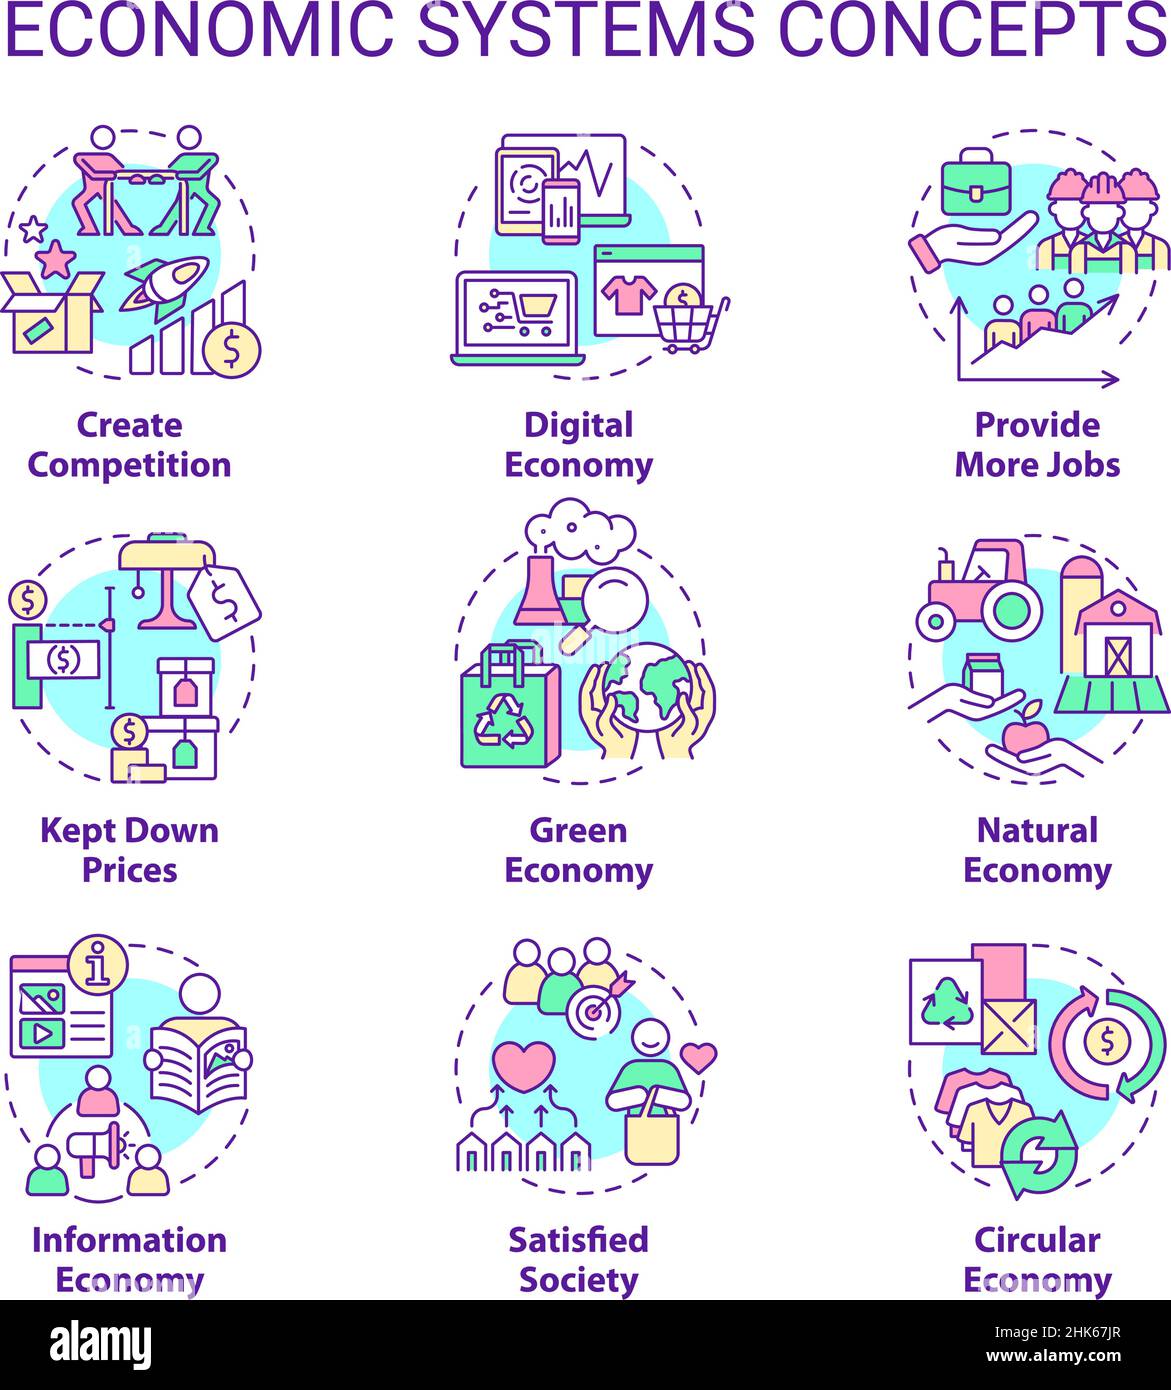 Economic systems concept icons set Stock Vector